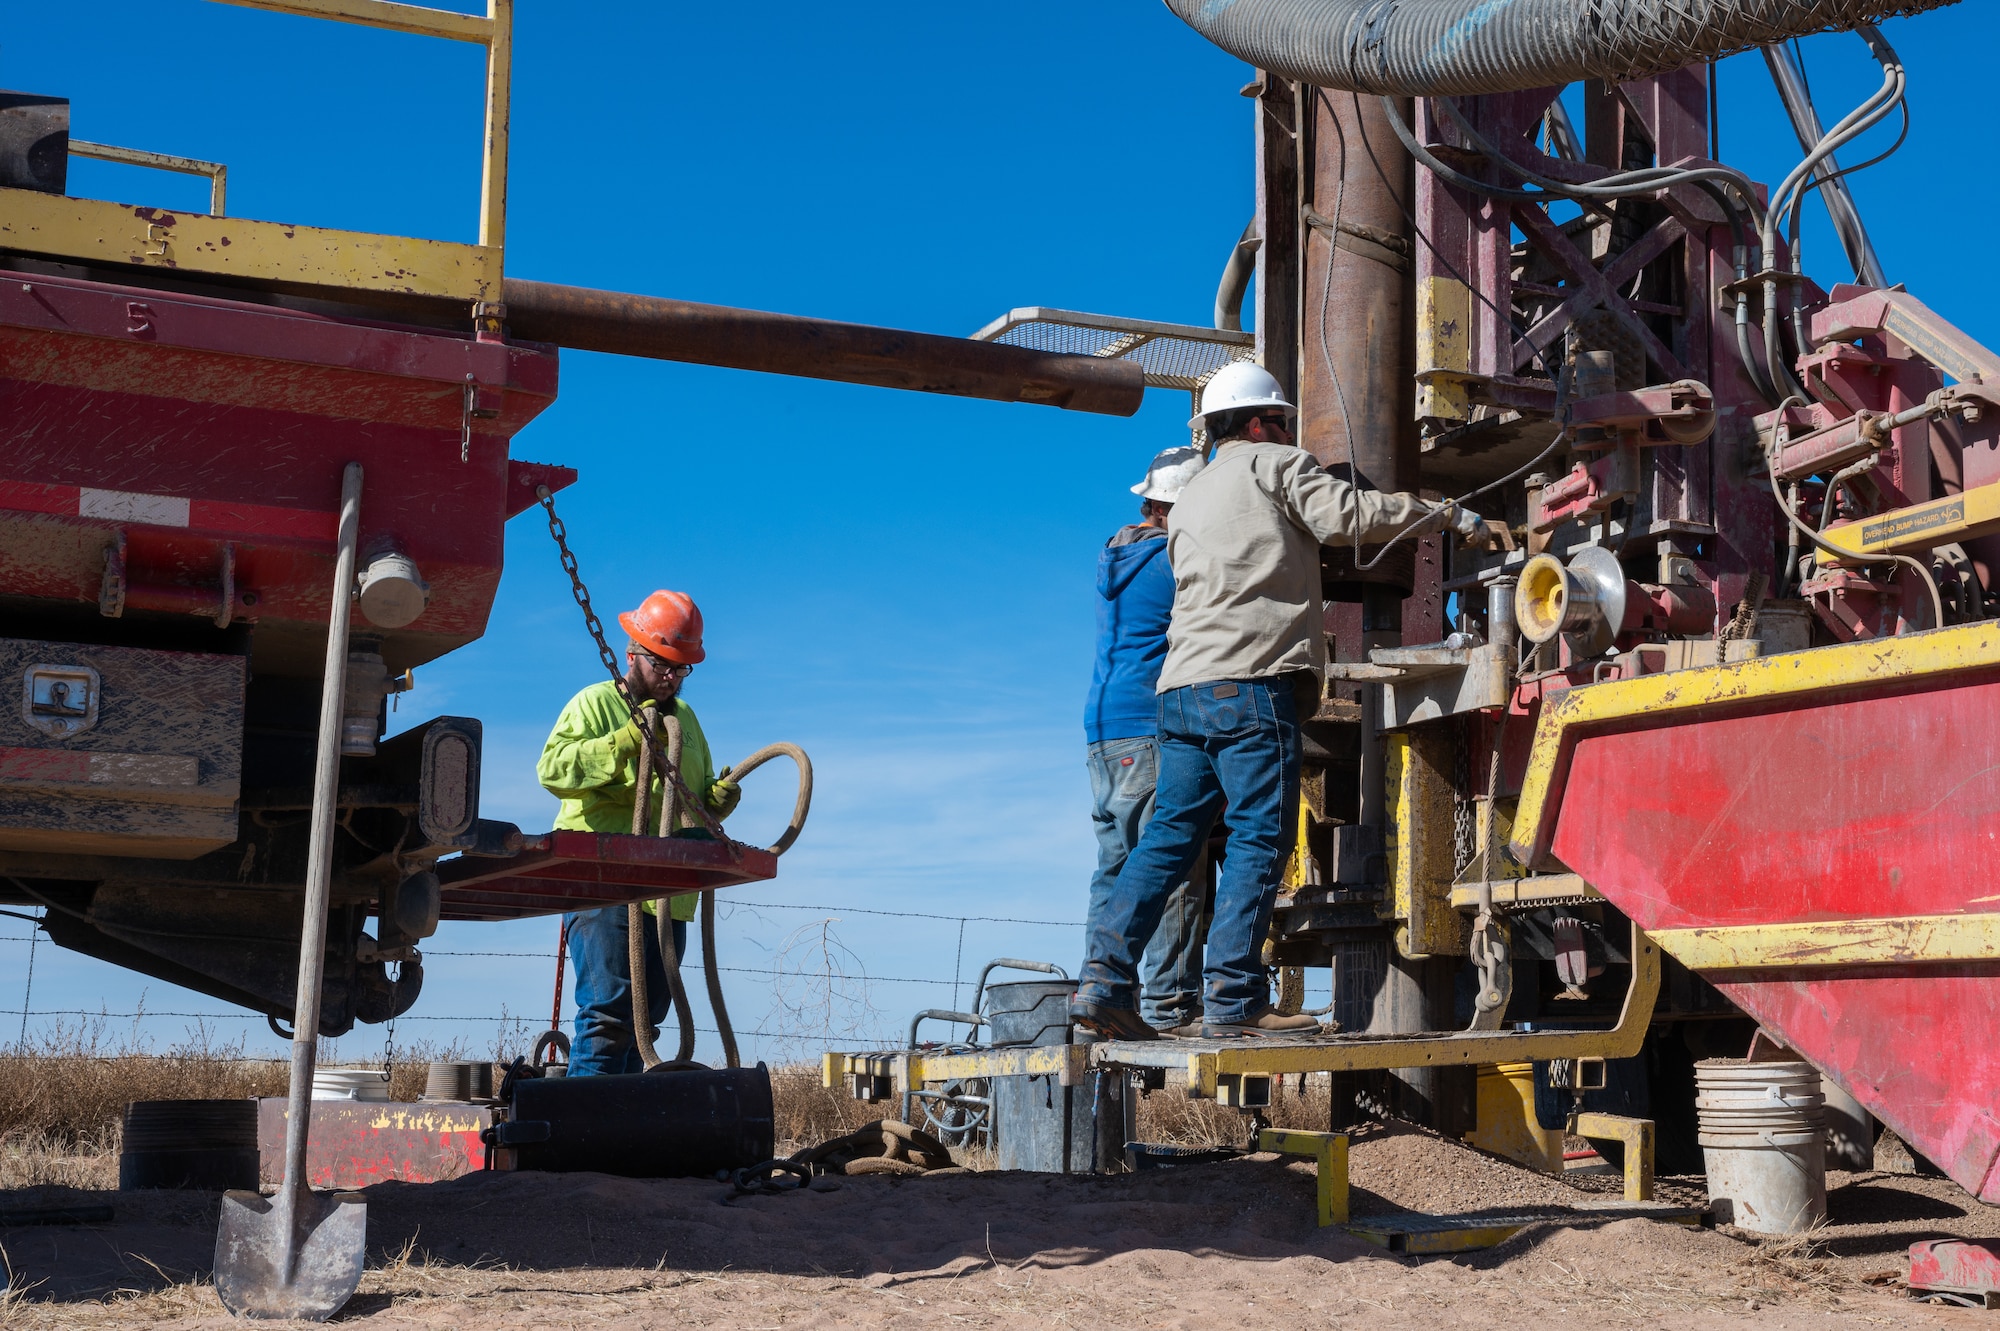 Contractors with Brice Construction Ltd. deploy an air rotary drilling rig as part of a pilot study civil engineering project during a per- and polyfluoroalkyl remedial investigation Nov. 18, 2021, at Cannon Air Force Base, New Mexico. Thanks to the $16.6M contract awarded to Cannon AFB by the U.S. Air Force, the Air Force Civil Engineer Center was able to accelerate PFAS mitigation efforts and conduct a multi-tiered study of affected water at and around the Clovis-based military installation. In addition to the remedial investigation contract, the pilot study and the Engineering Evaluation/Cost Analysis projects will identify and evaluate alternative solutions to be implemented before the final remedy once all investigations are complete.